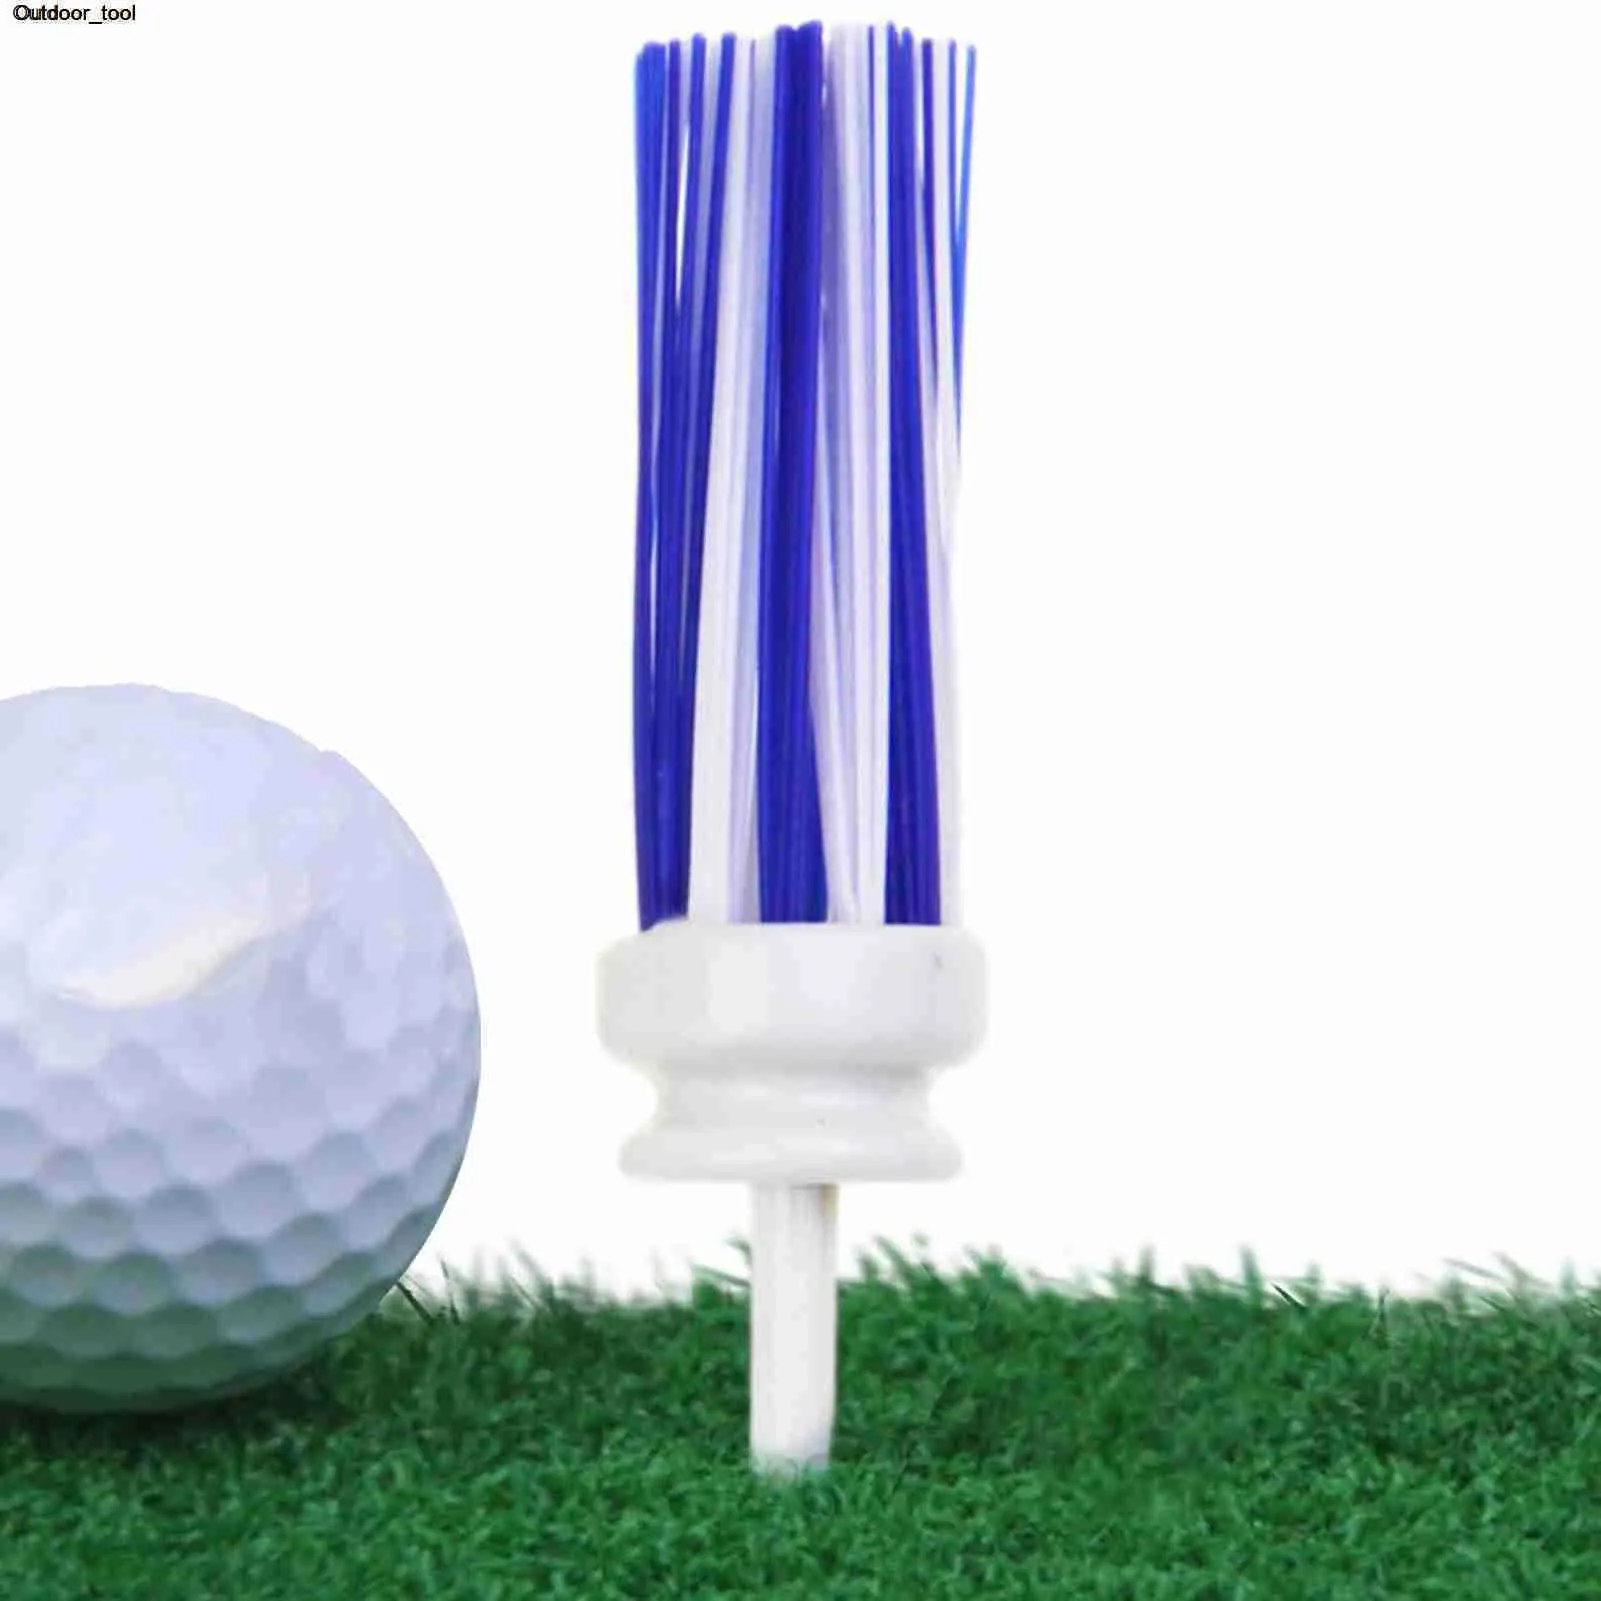 New 1Pc Unbreakable Golf Tees Brush Support For Longball Base Low Friction More Distance Different Height 54/70/83mm